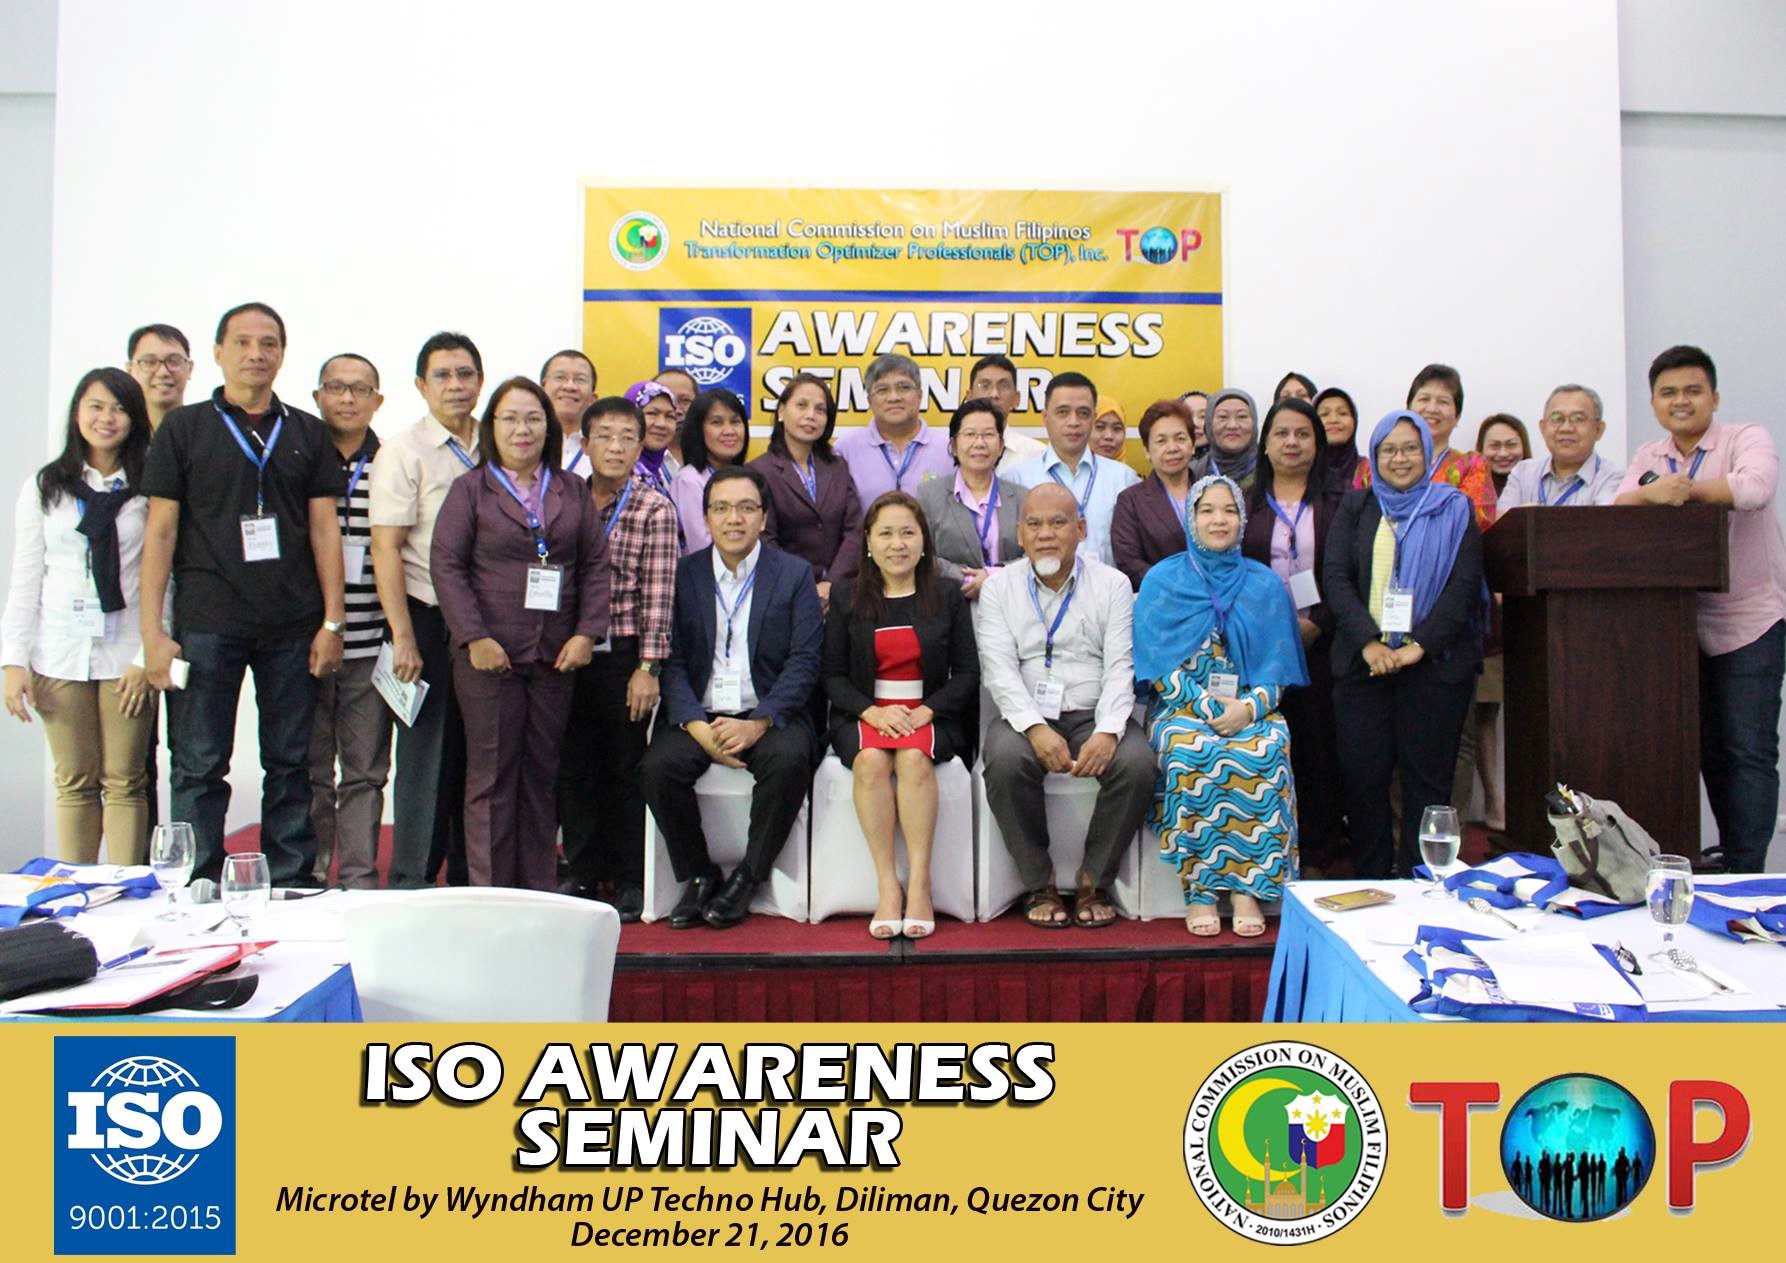 A photo op of the participants of ISO Seminar